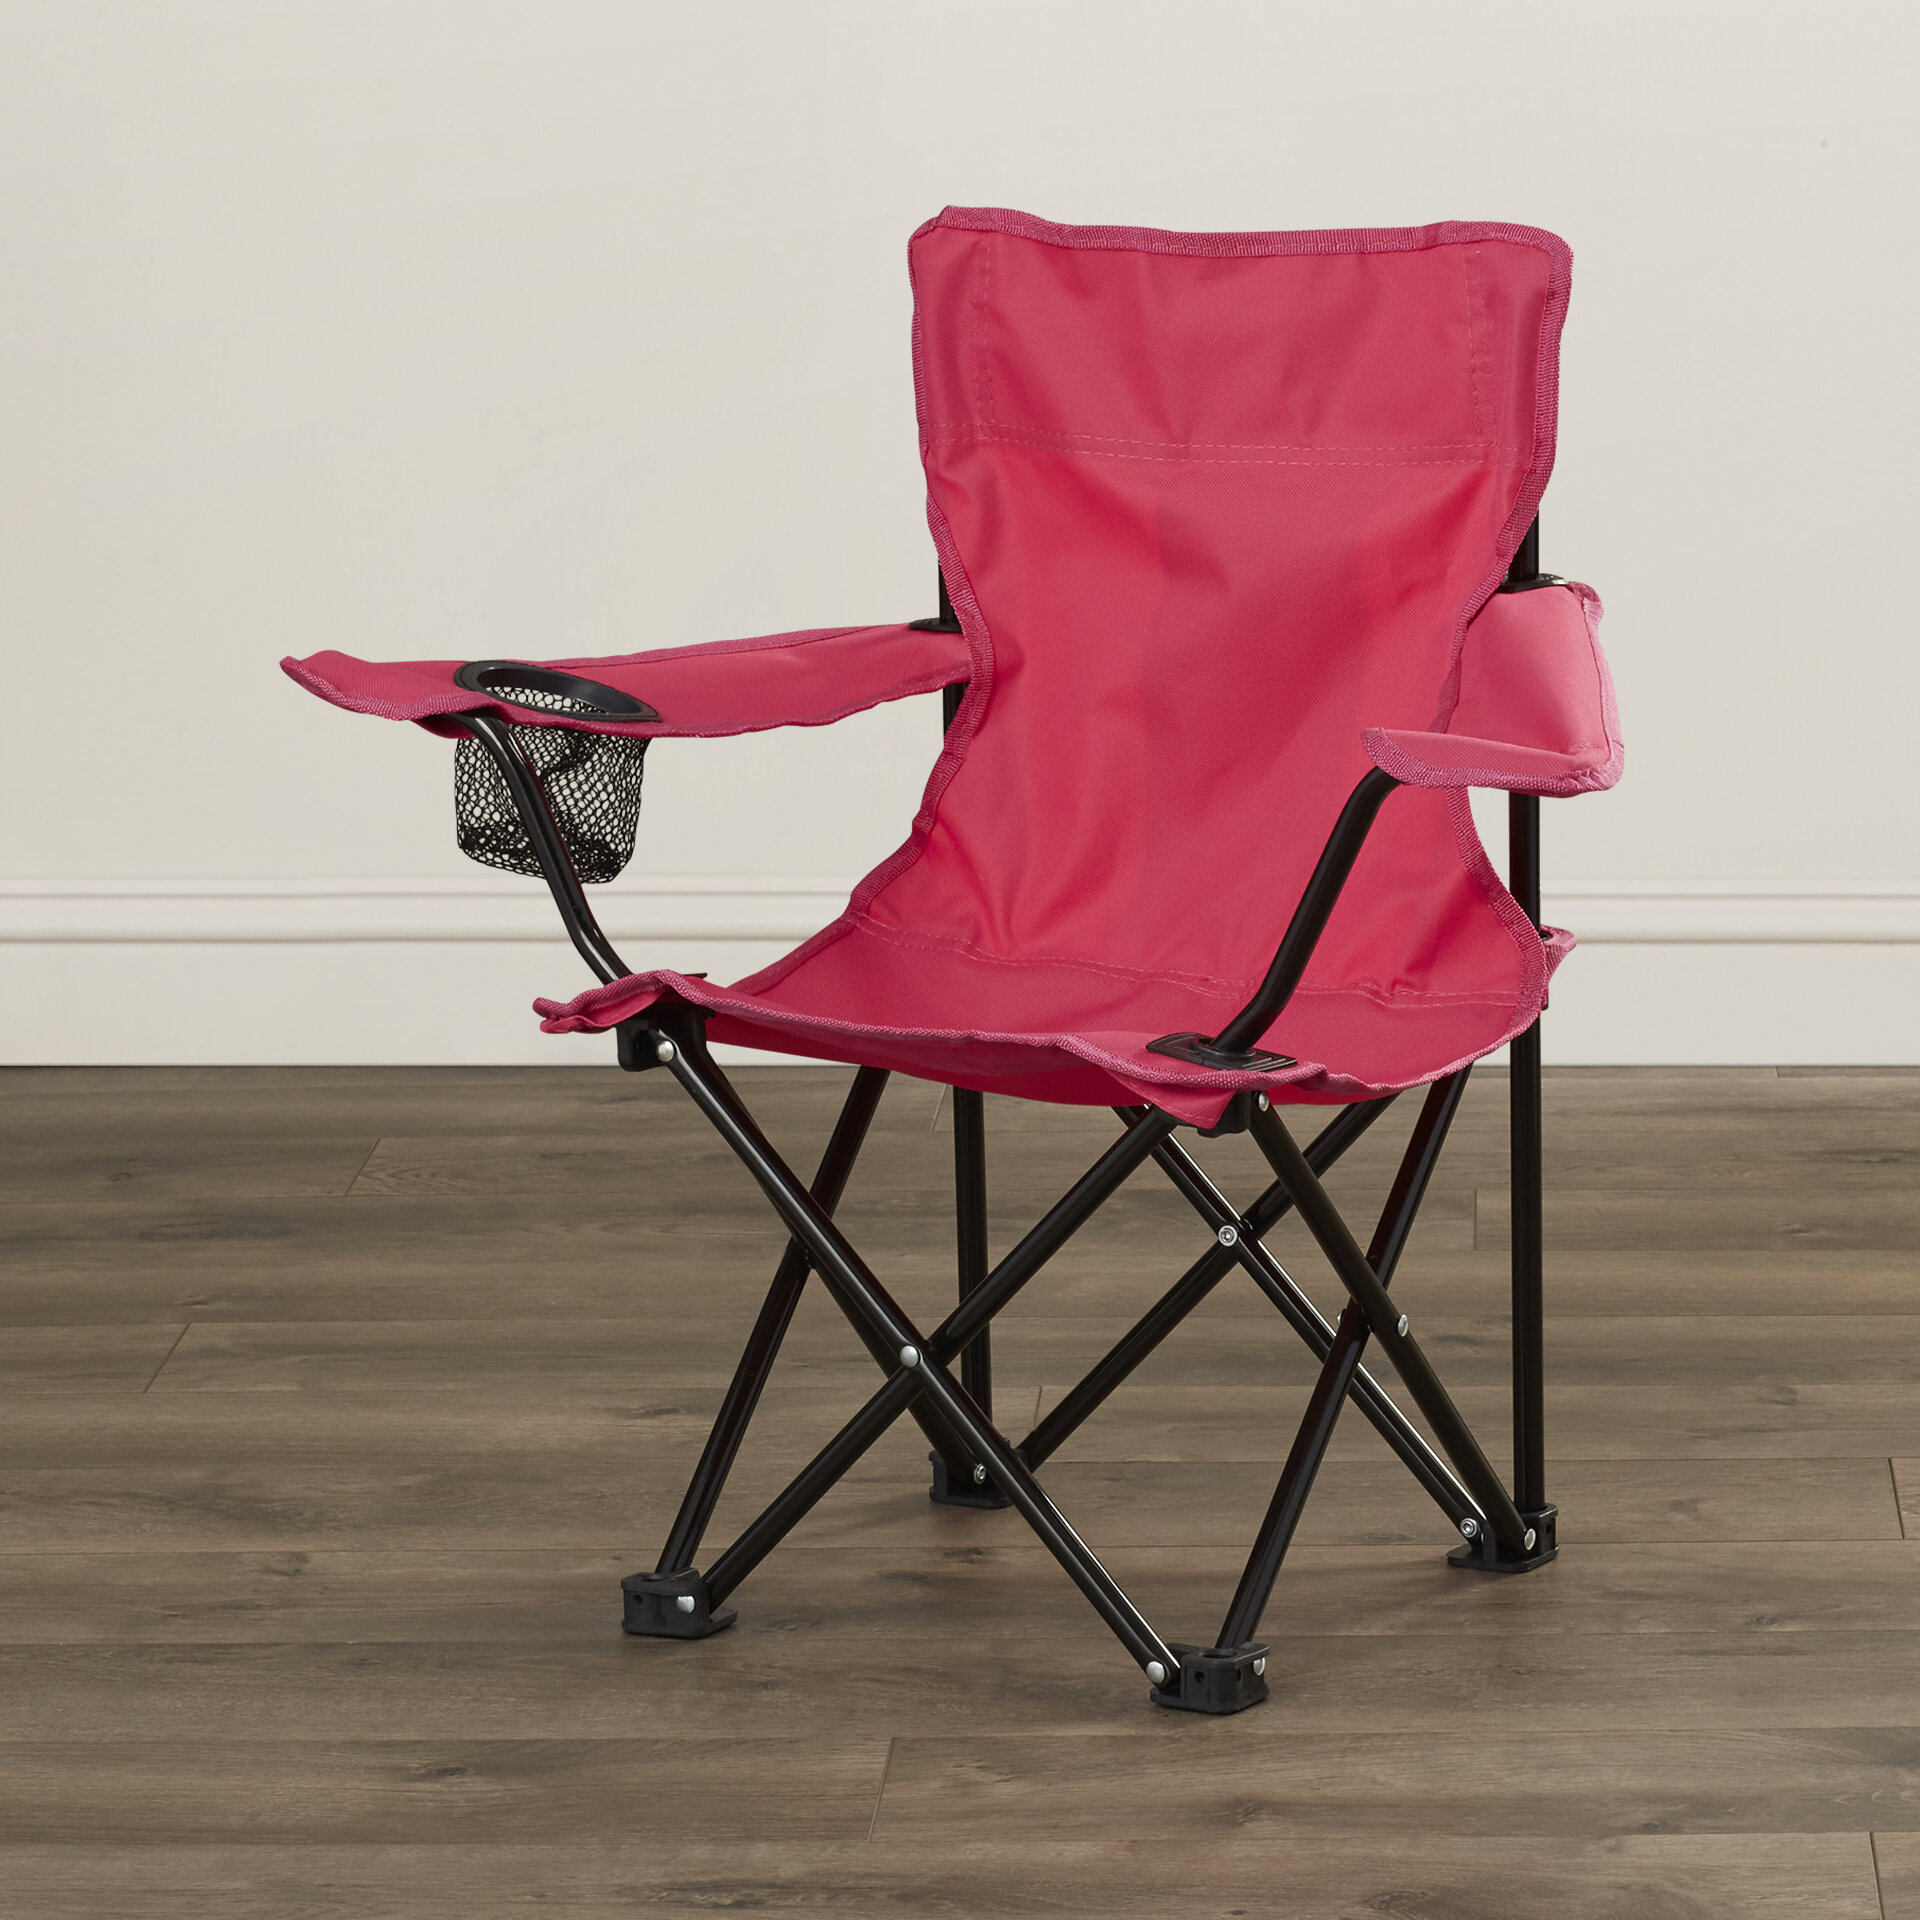 crenshaw outdoor folding kids camping chair with cup holder